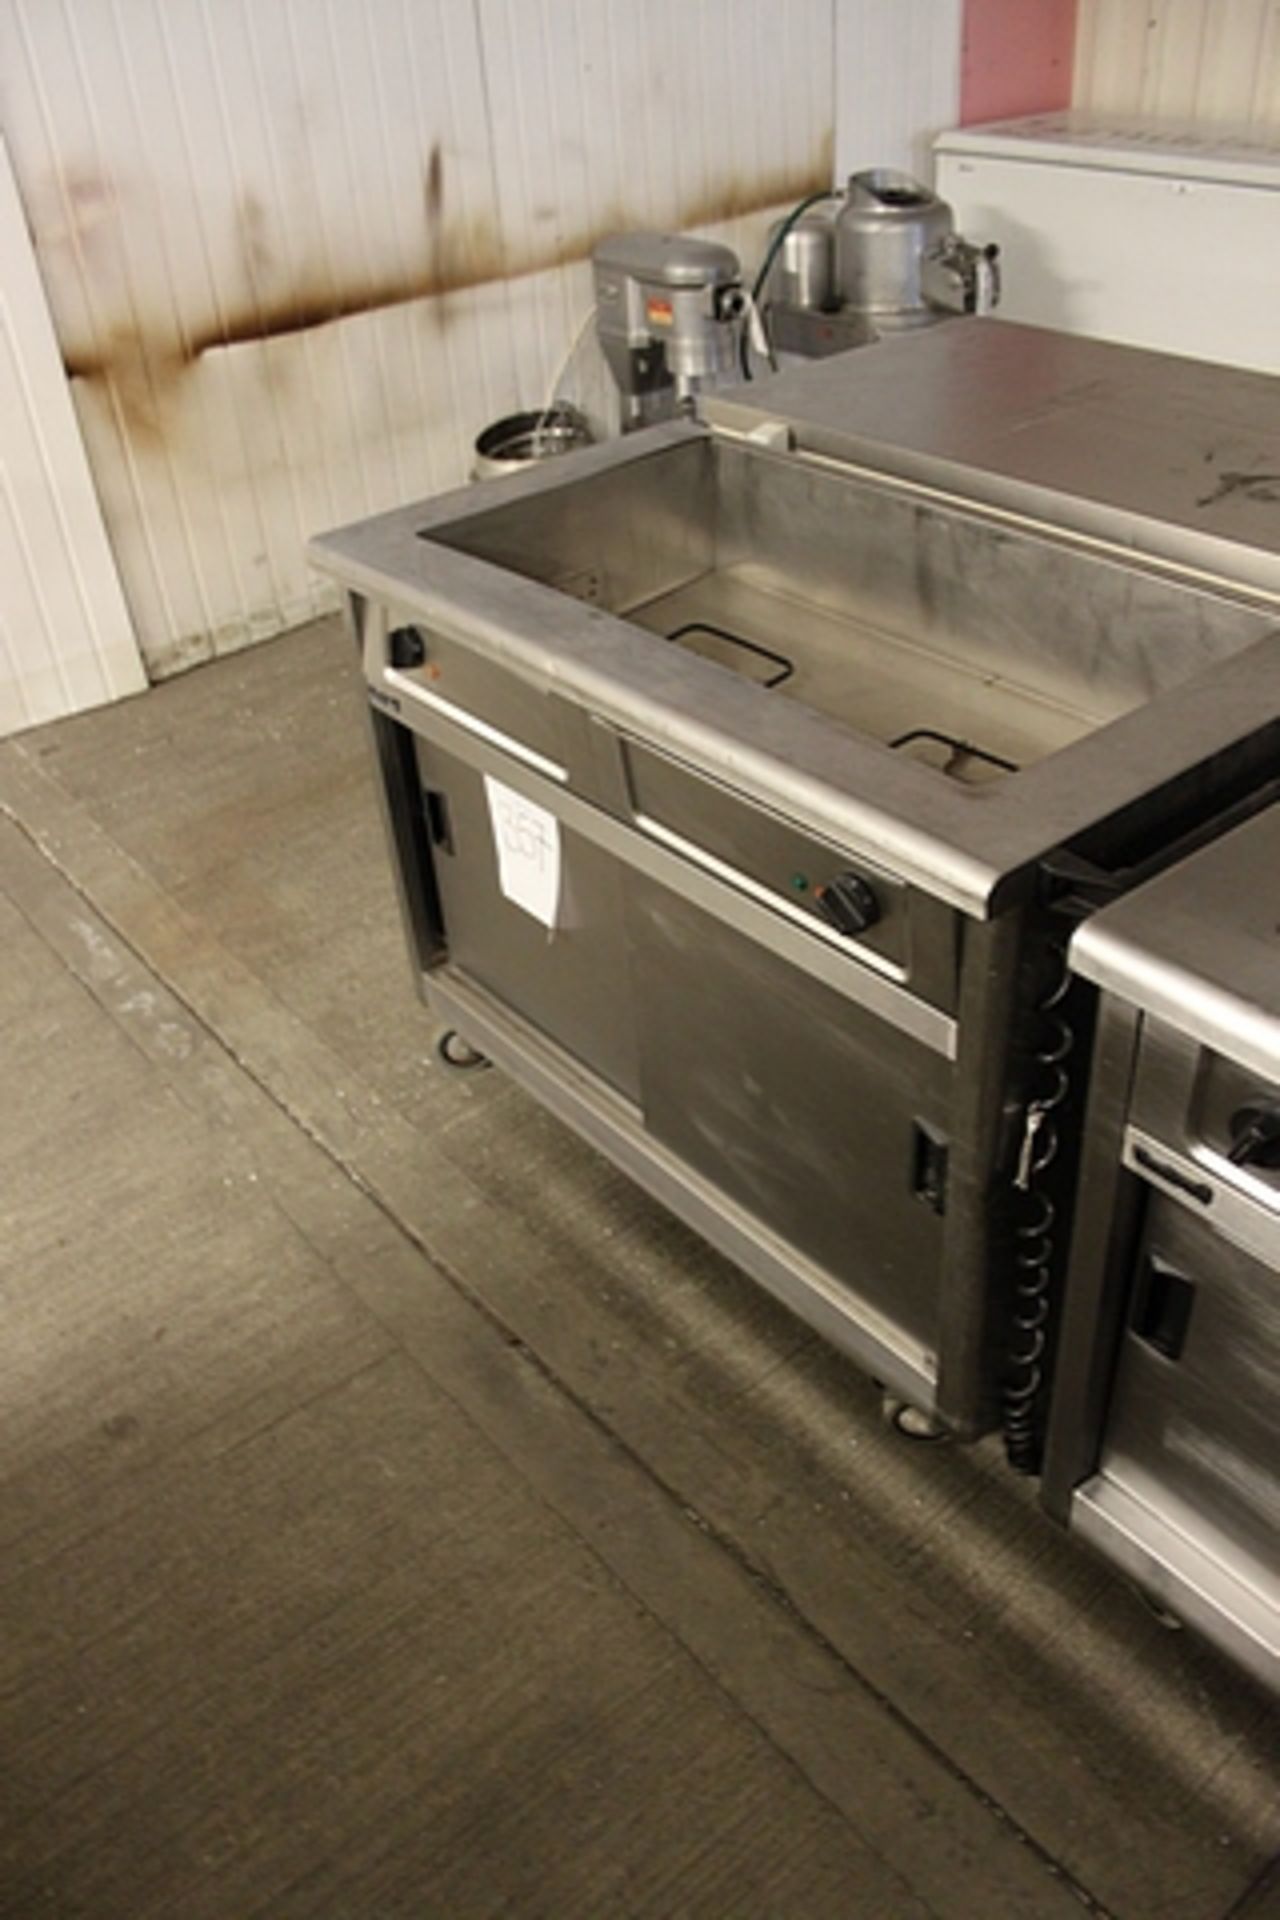 Hobart CAN-E S/N 864C29852 pass-through conveyorised dishwasher complete with infeed